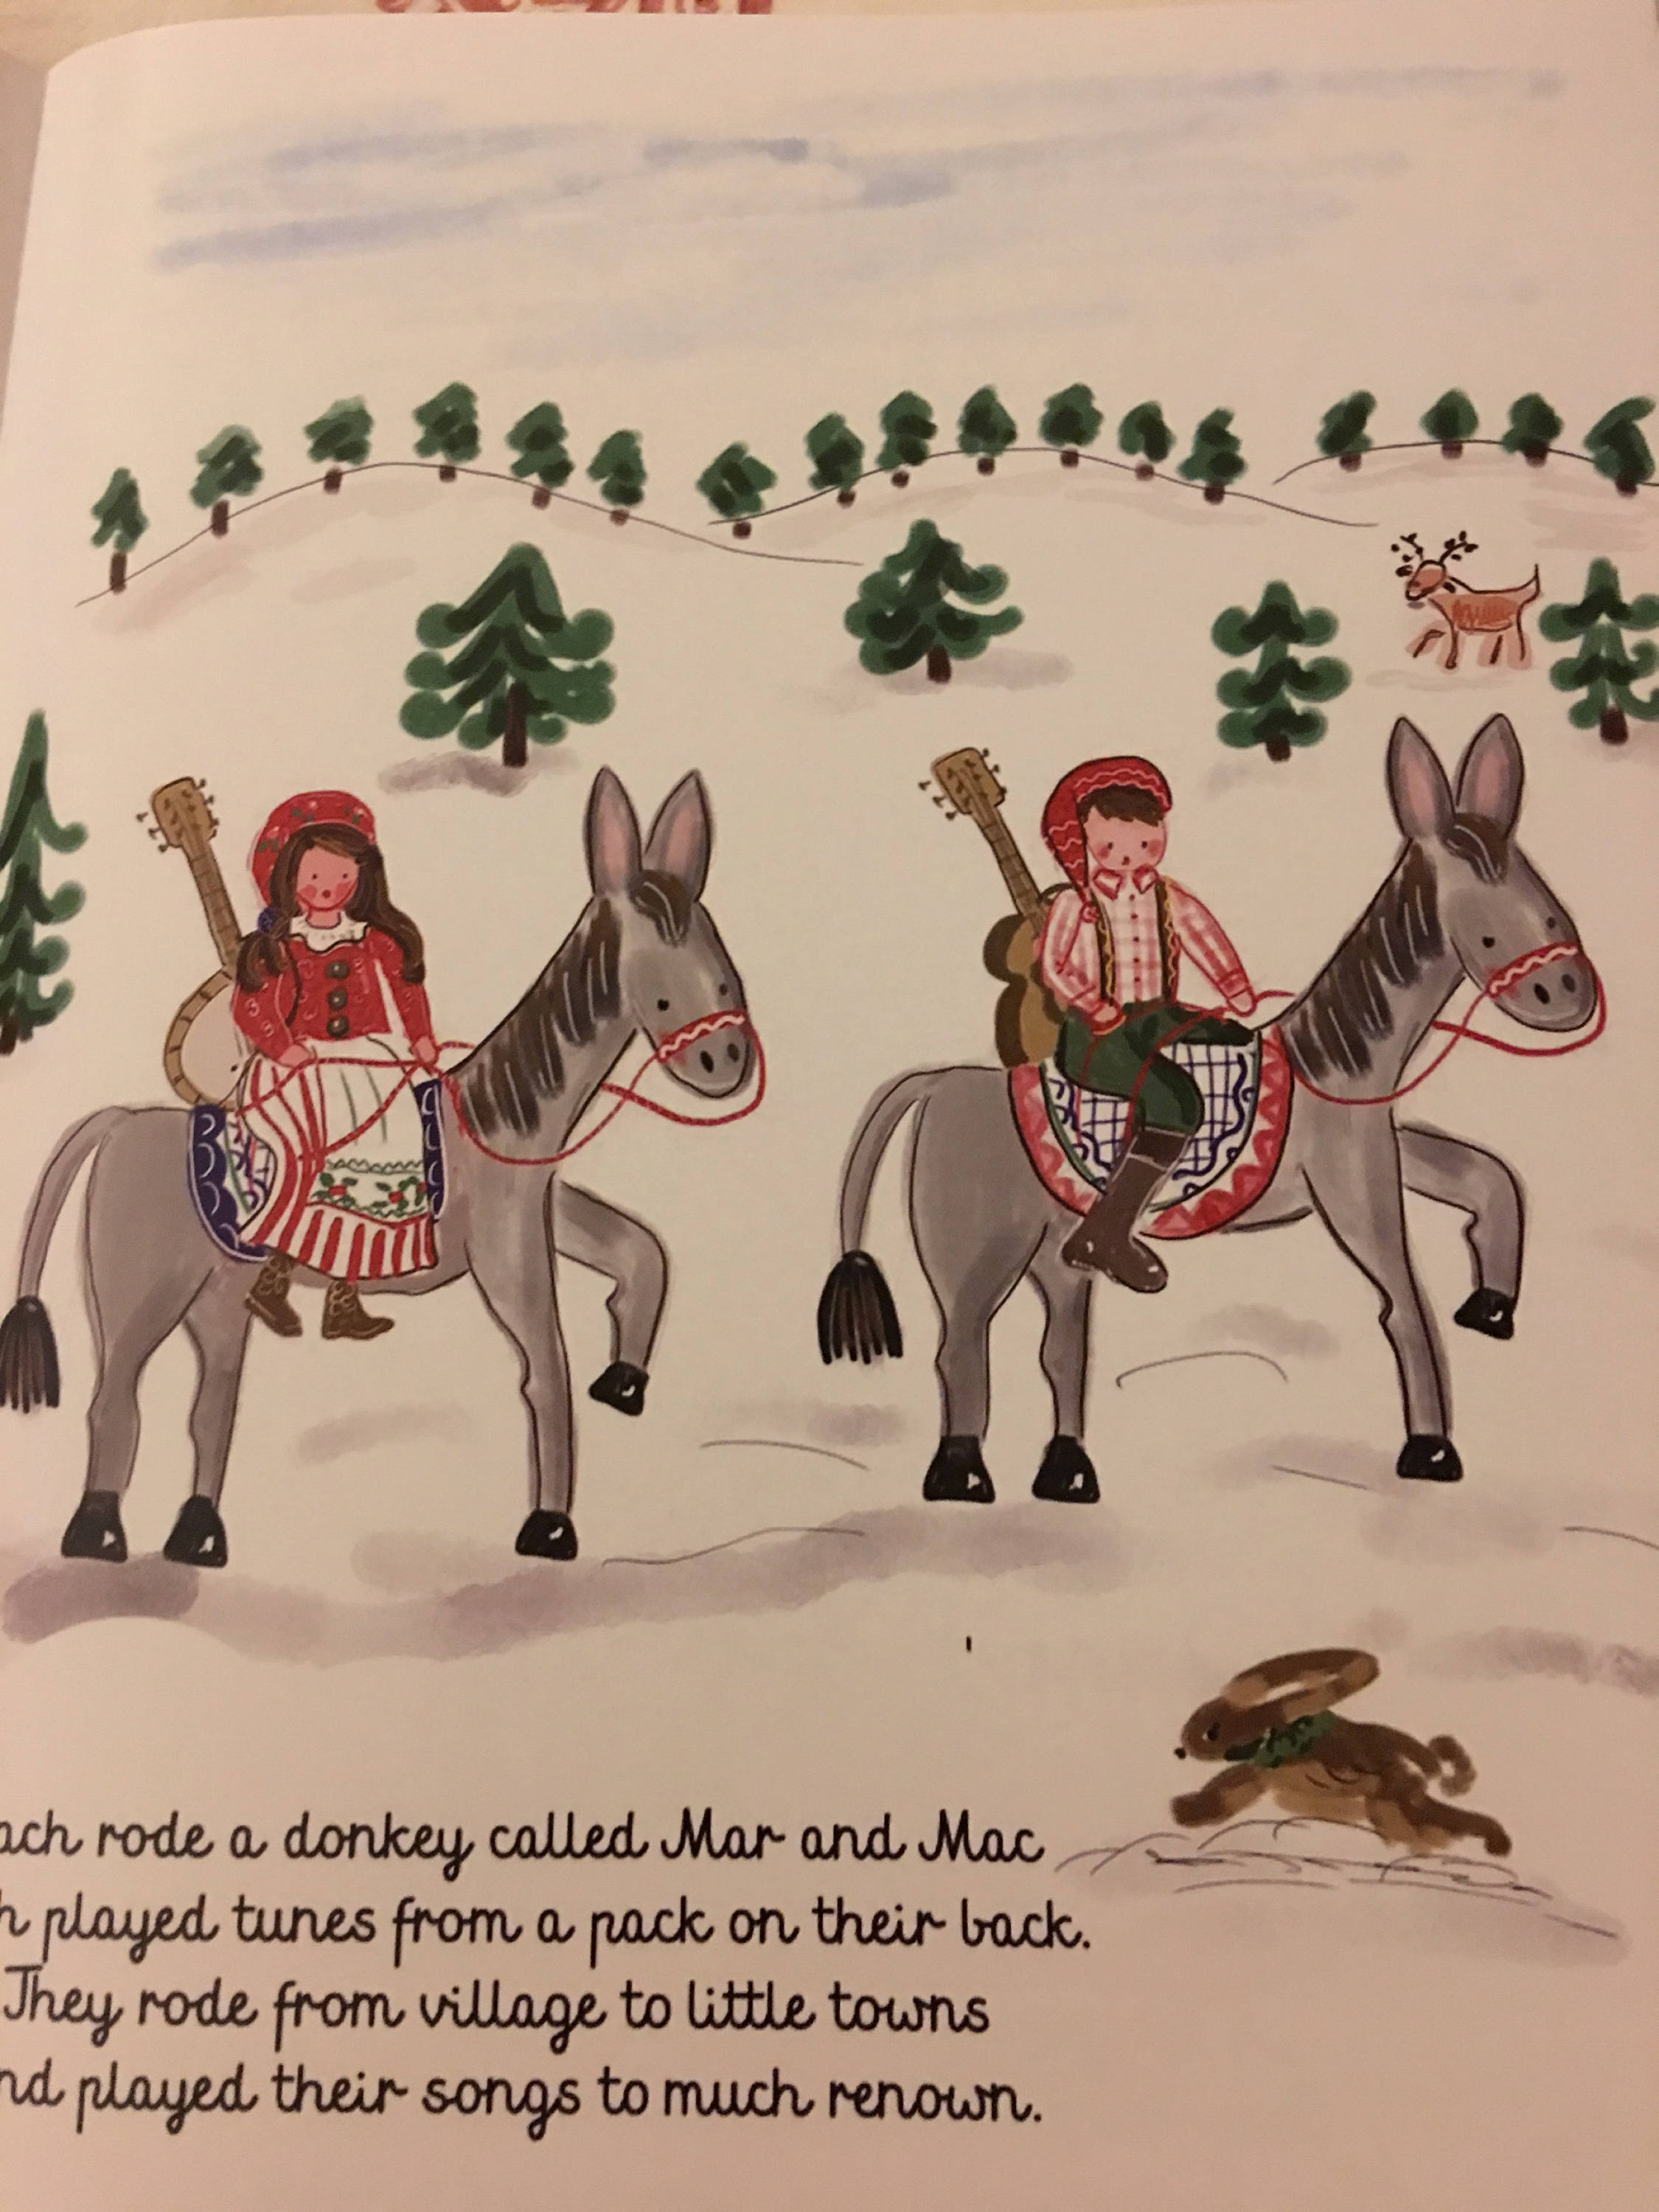 Christmas Book "Little His Majesty" - The 12 Days of Christmas - Tricia Lowenfield Design